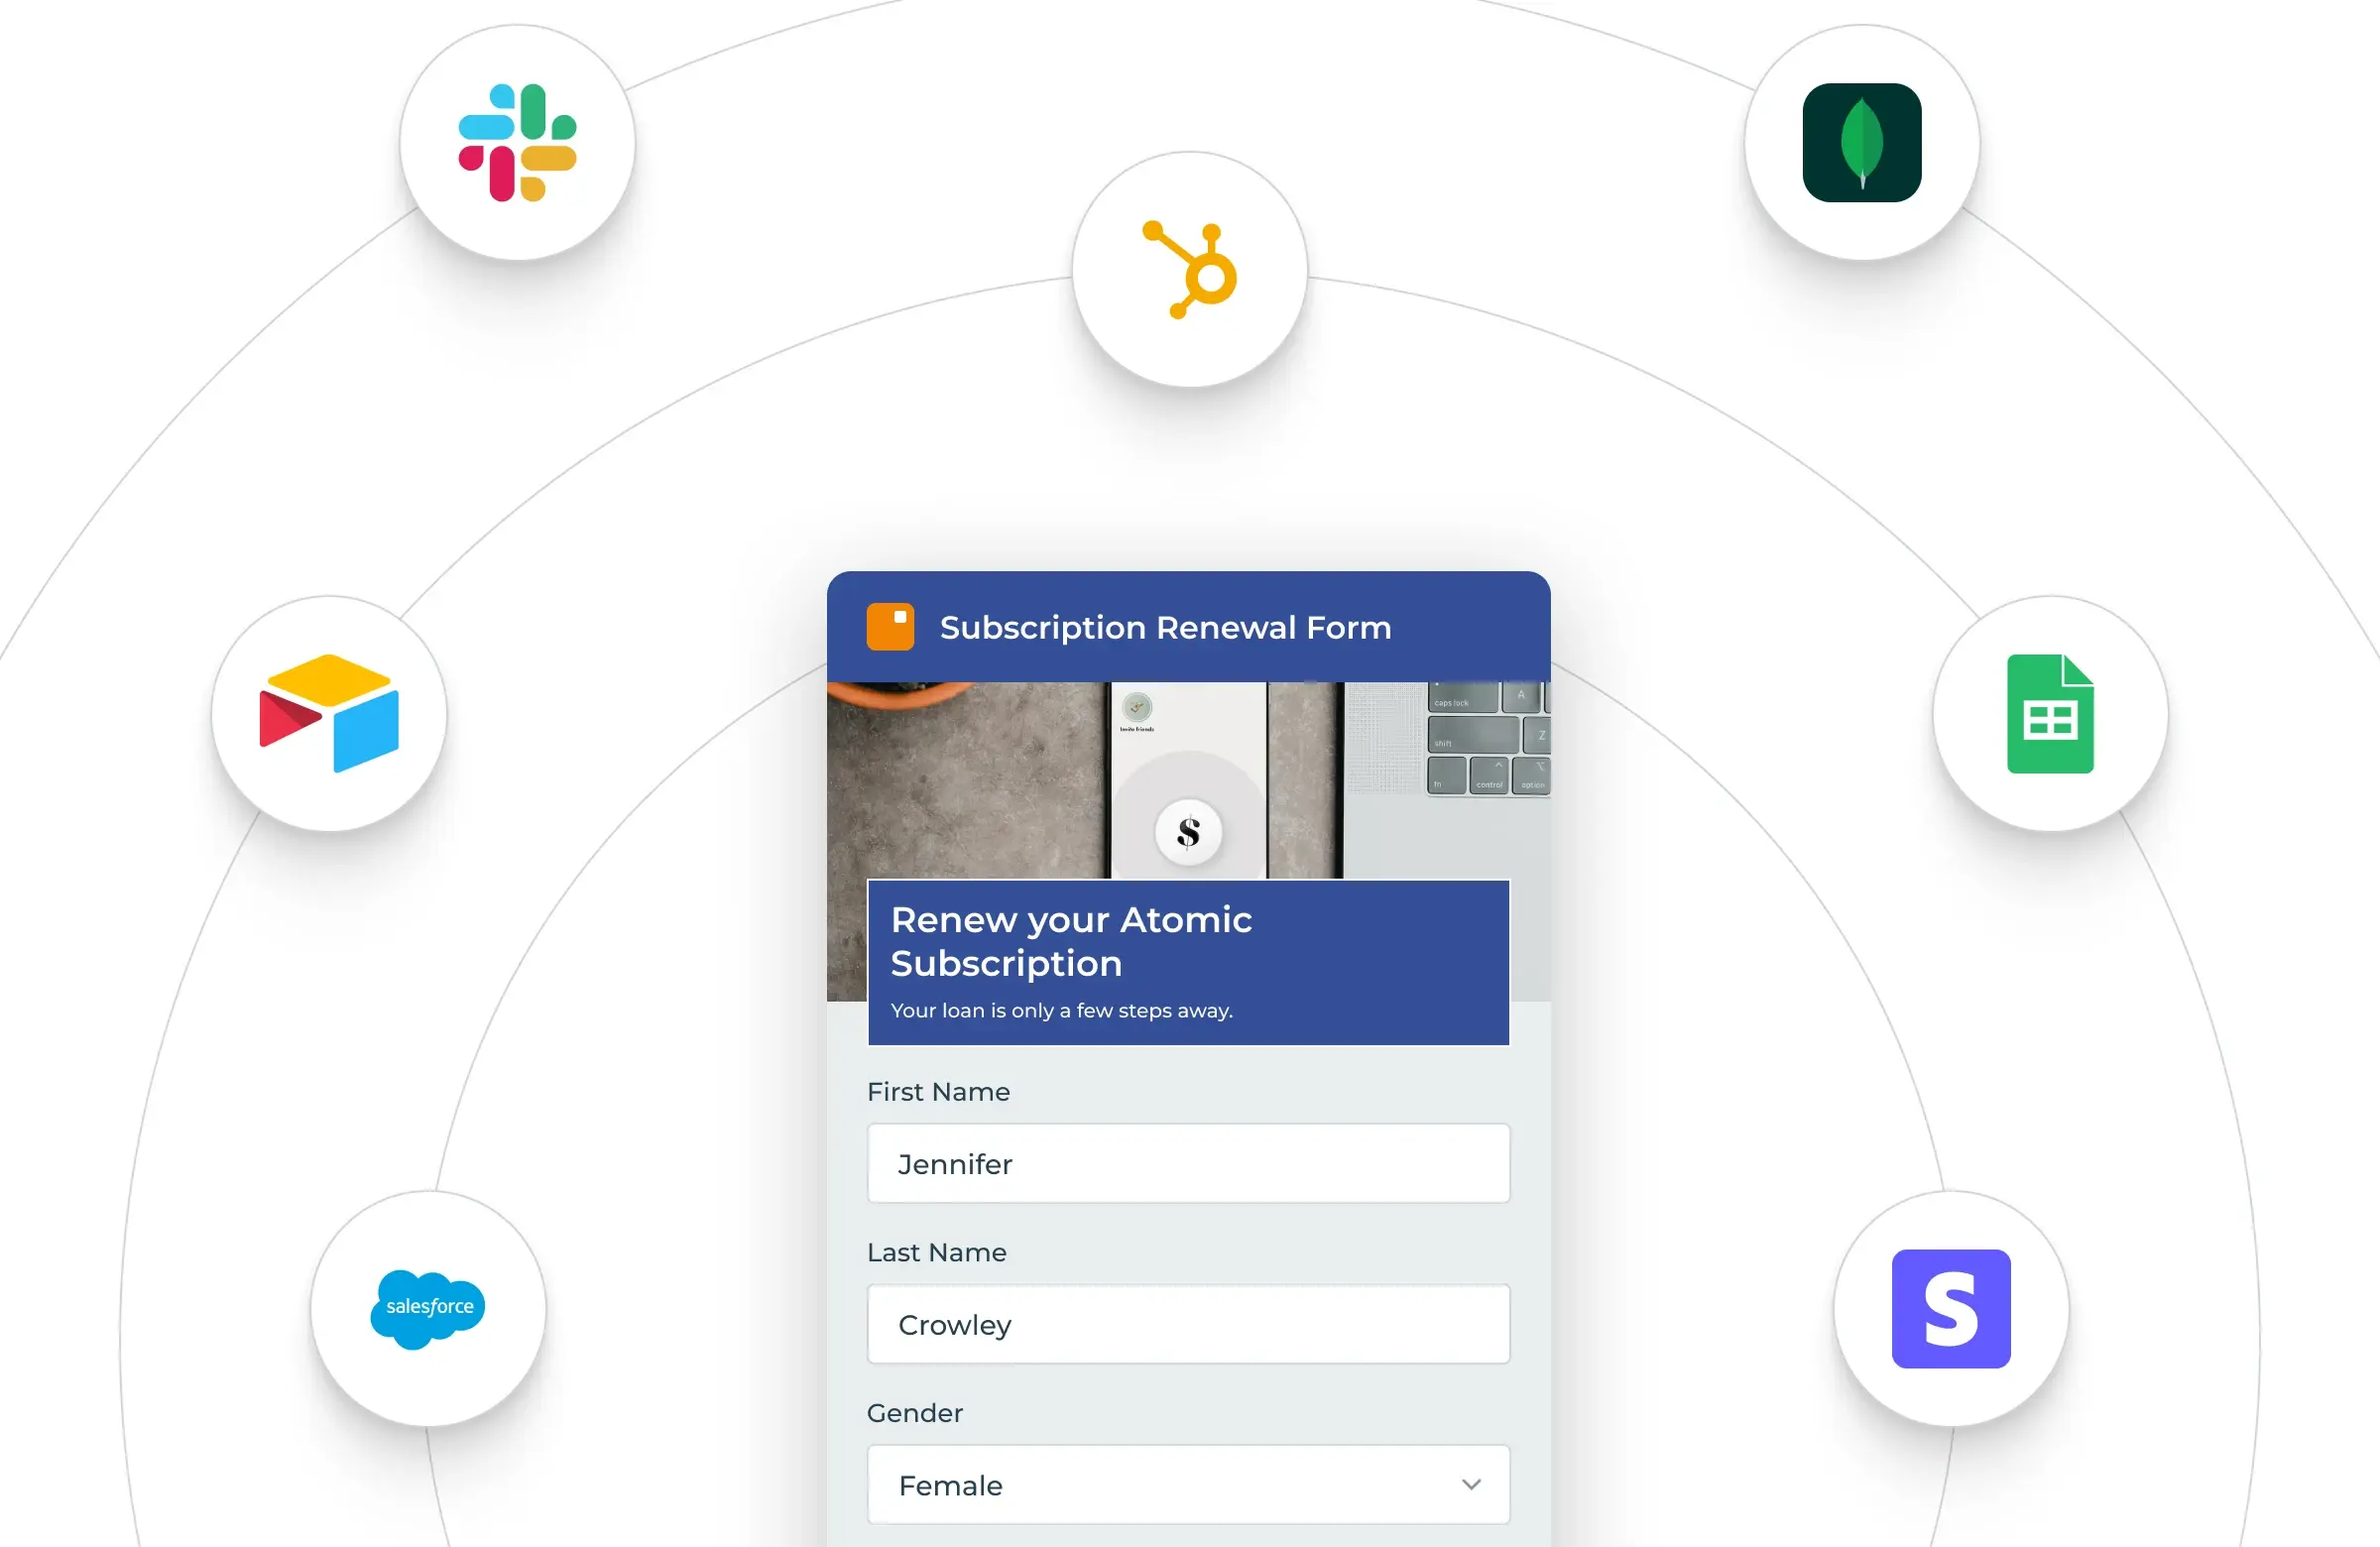 Integrate mobile forms with business tools and automate workflows